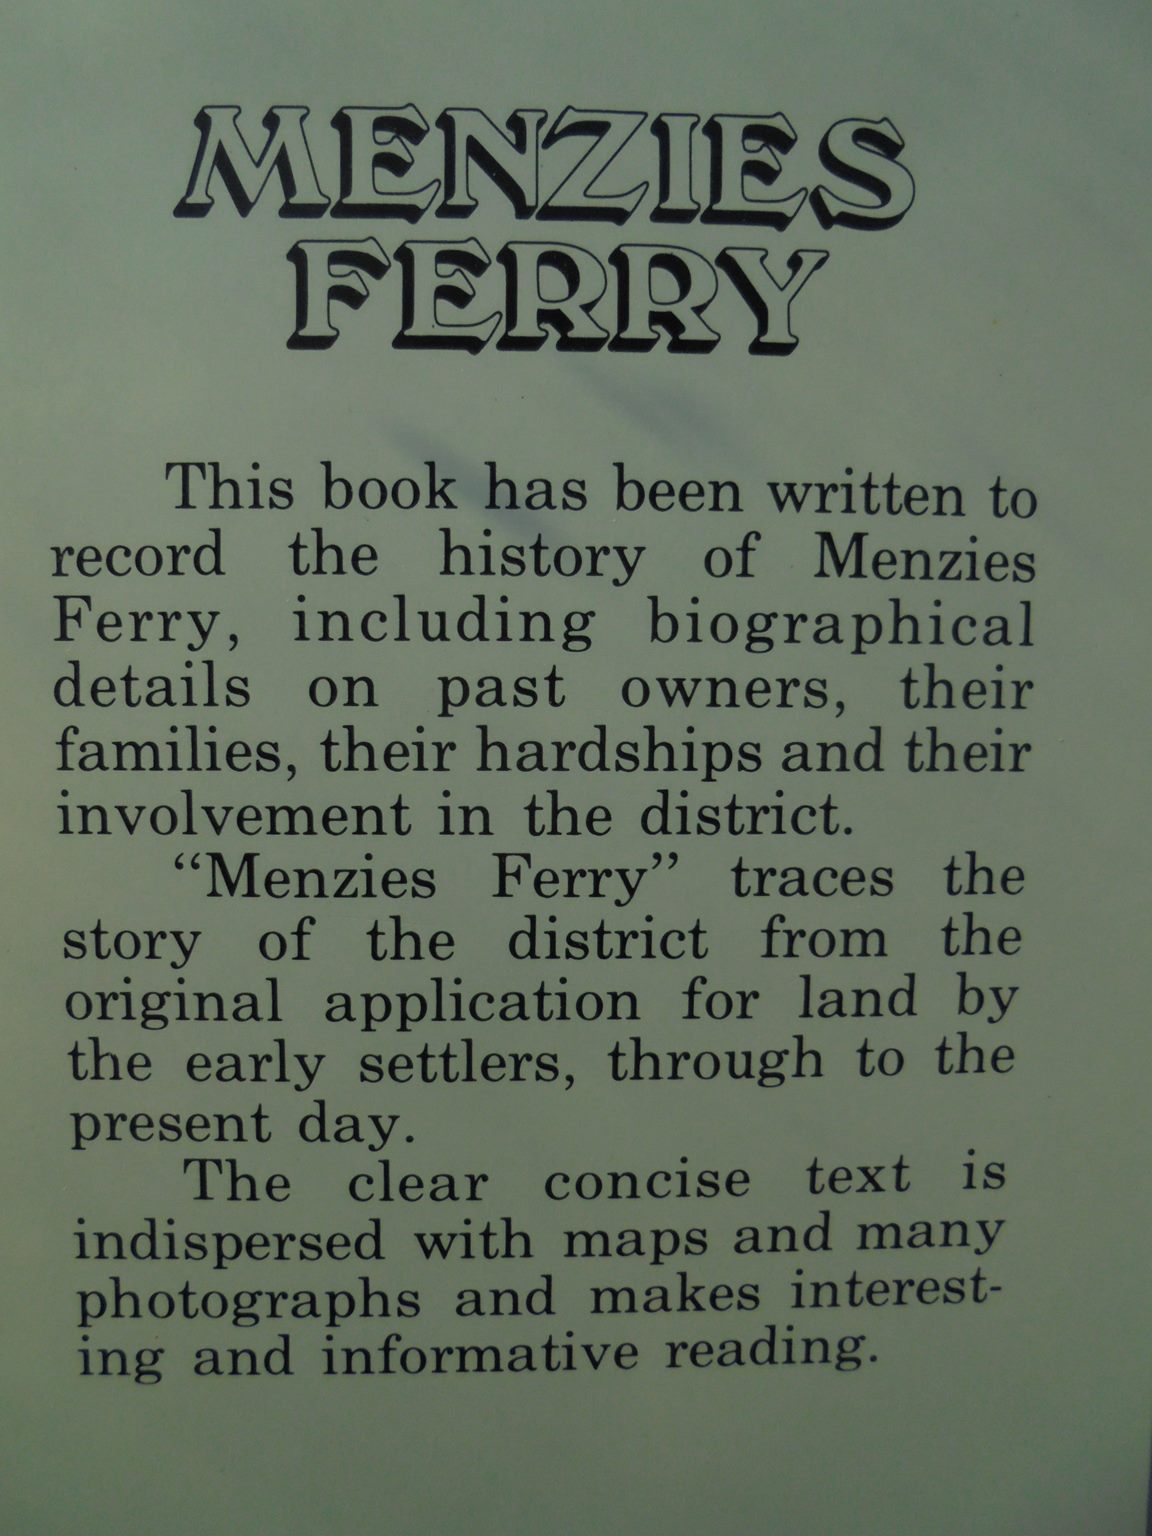 Menzies Ferry: A History of the District.